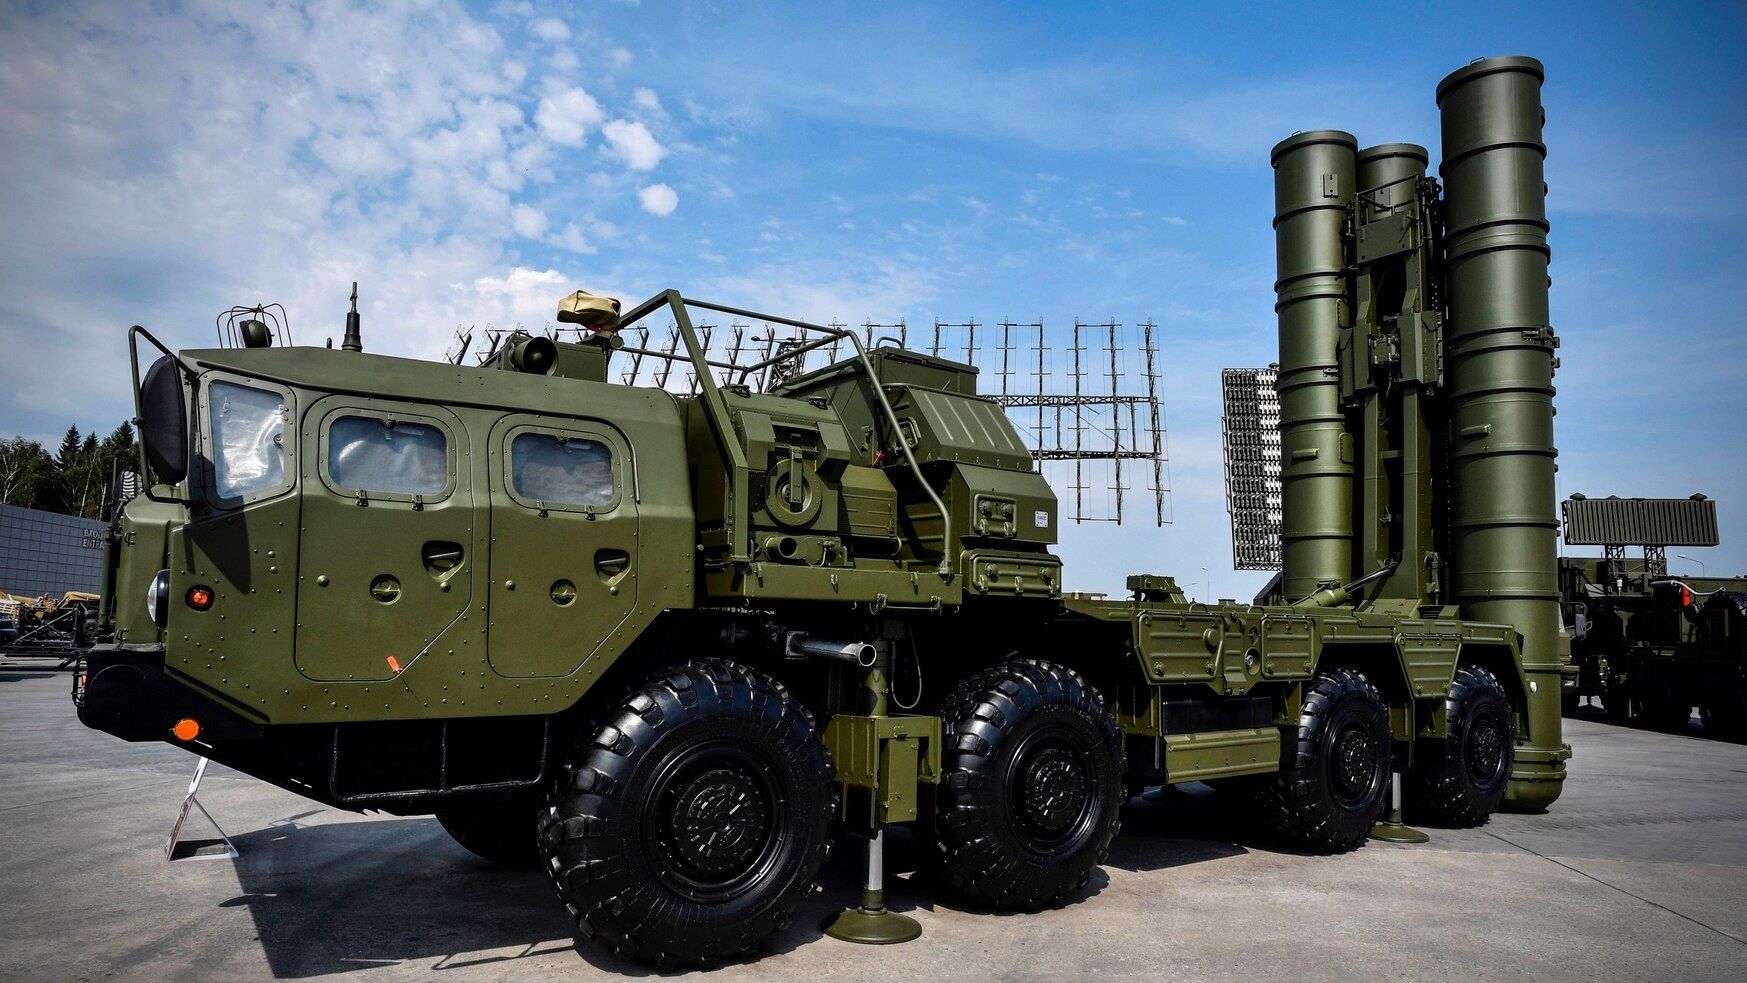 Russian S-400 air defense system, on display in 2017, is at the heart of a split between the U.S. and its NATO ally Turkey. (ALEXANDER NEMENOV/AFP via Getty Images)